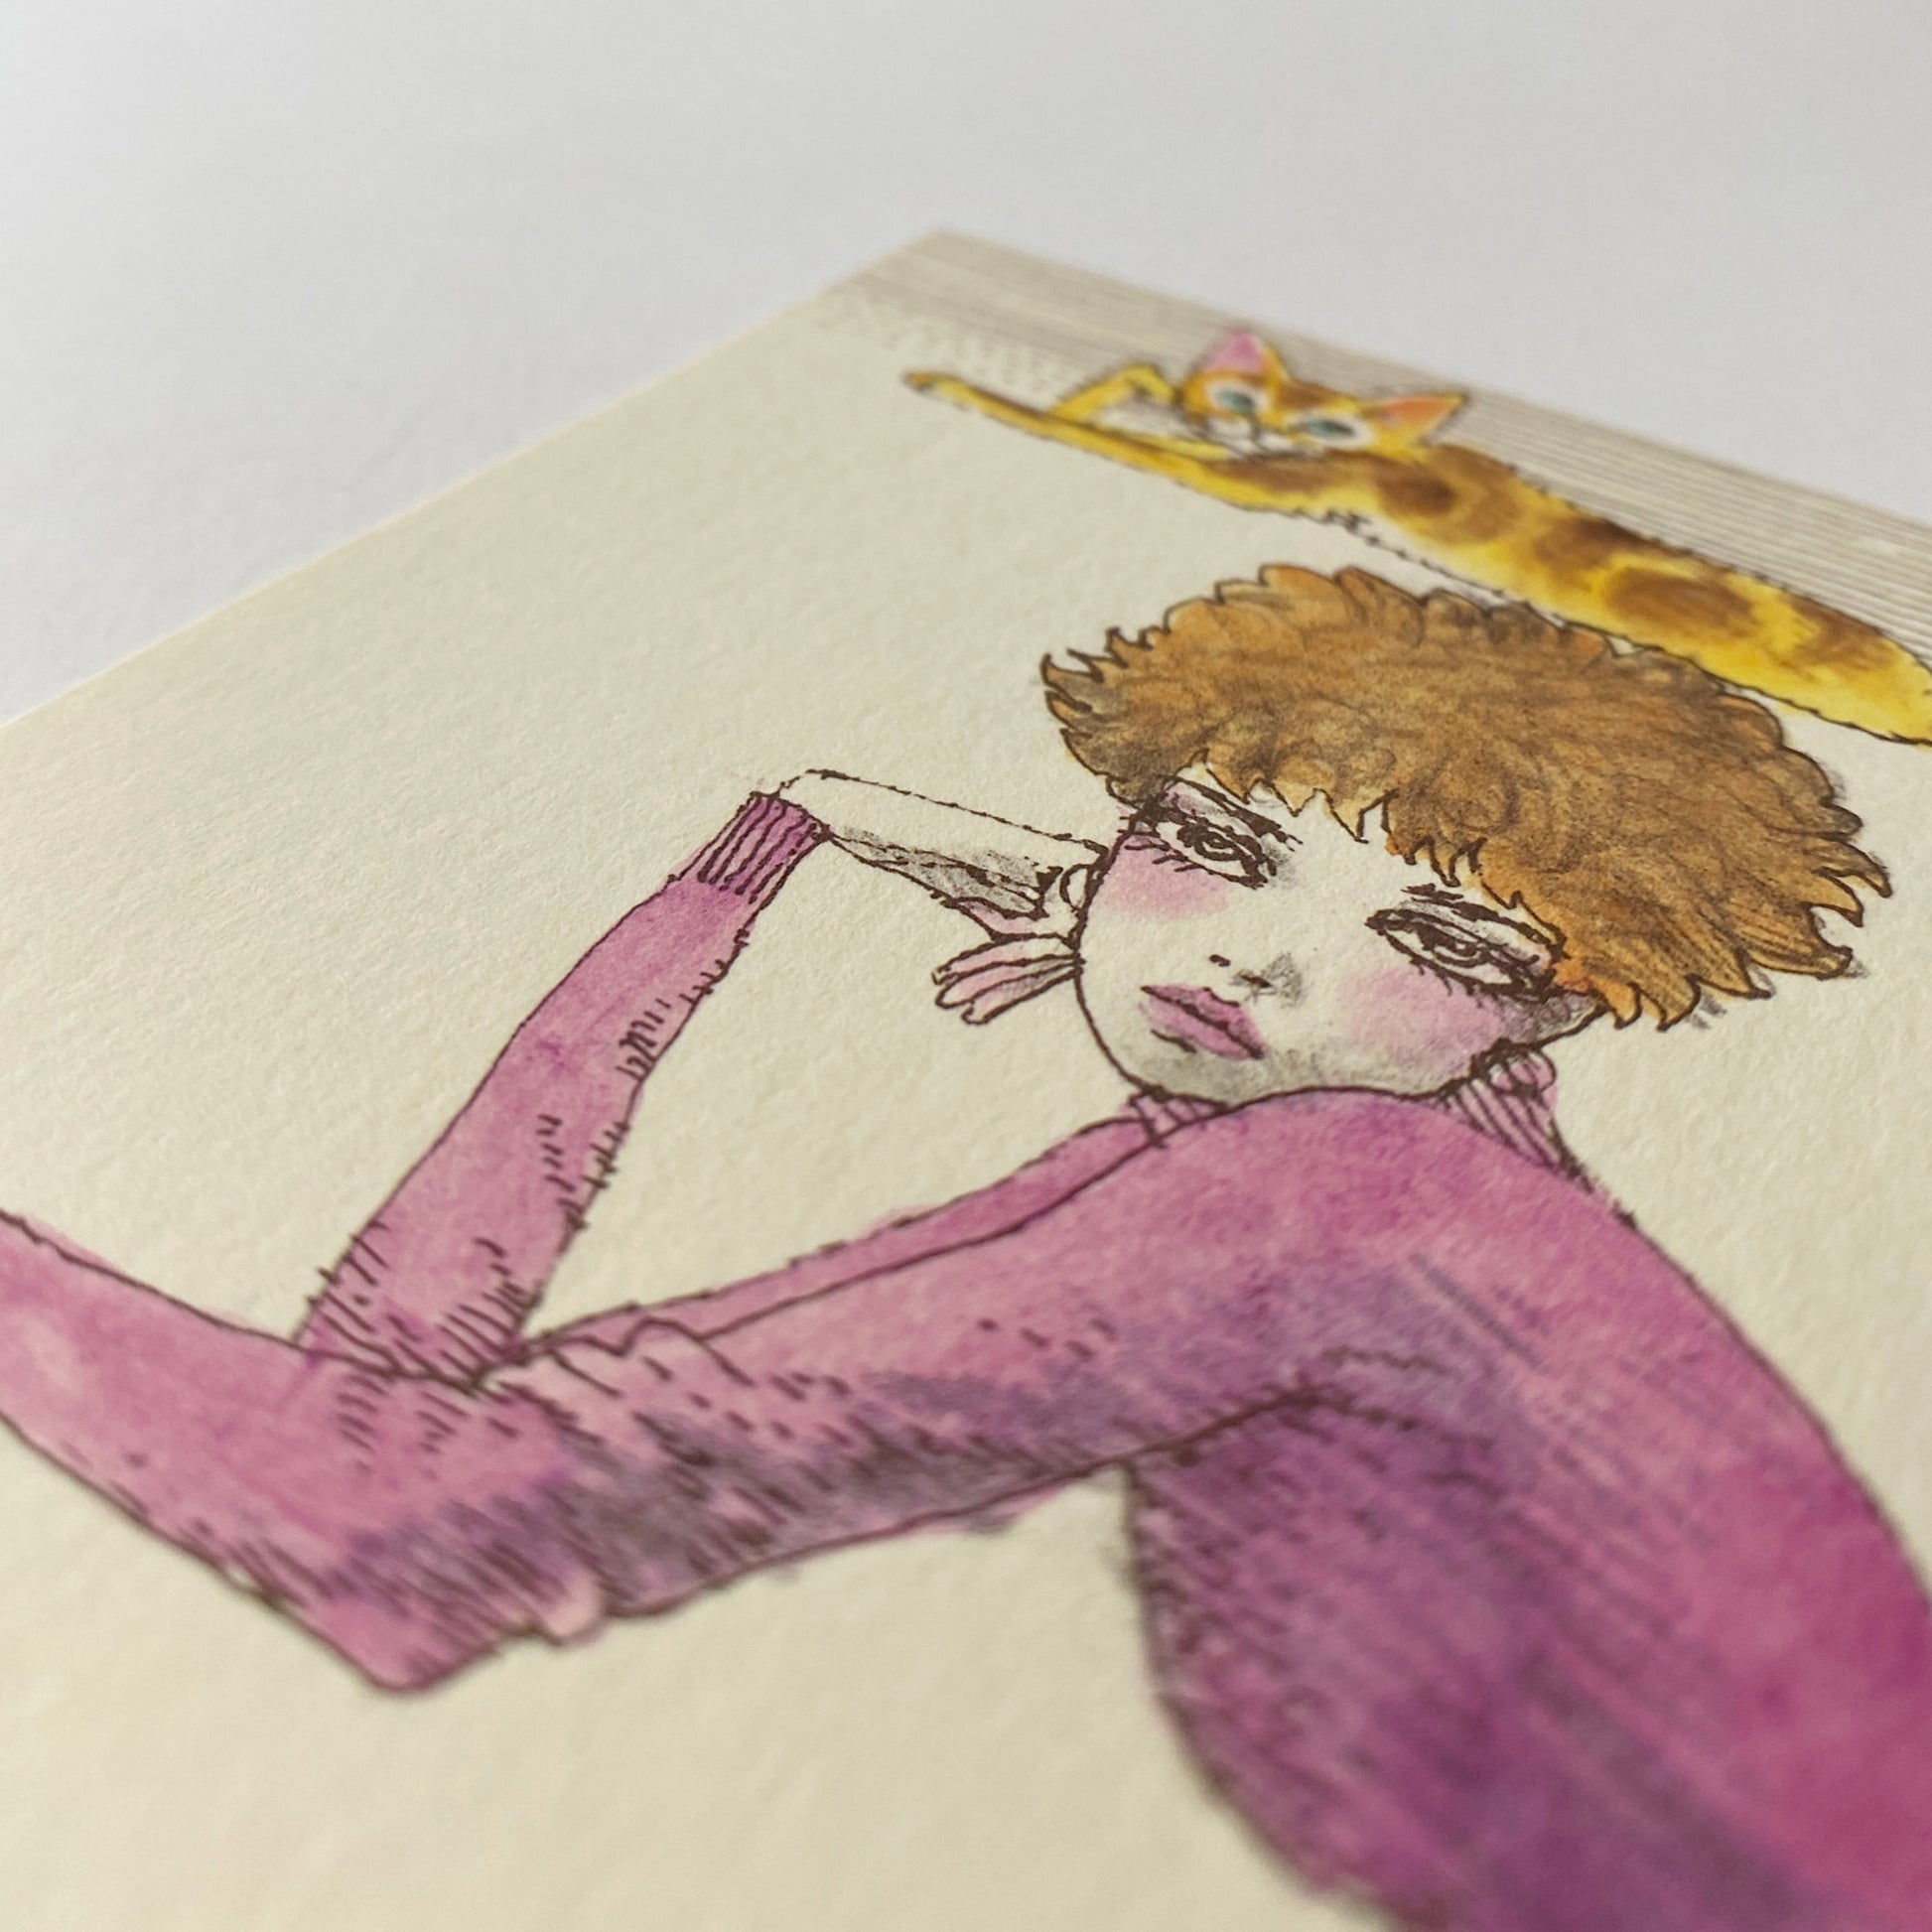 illustrated postcard : thoughtful made in japan